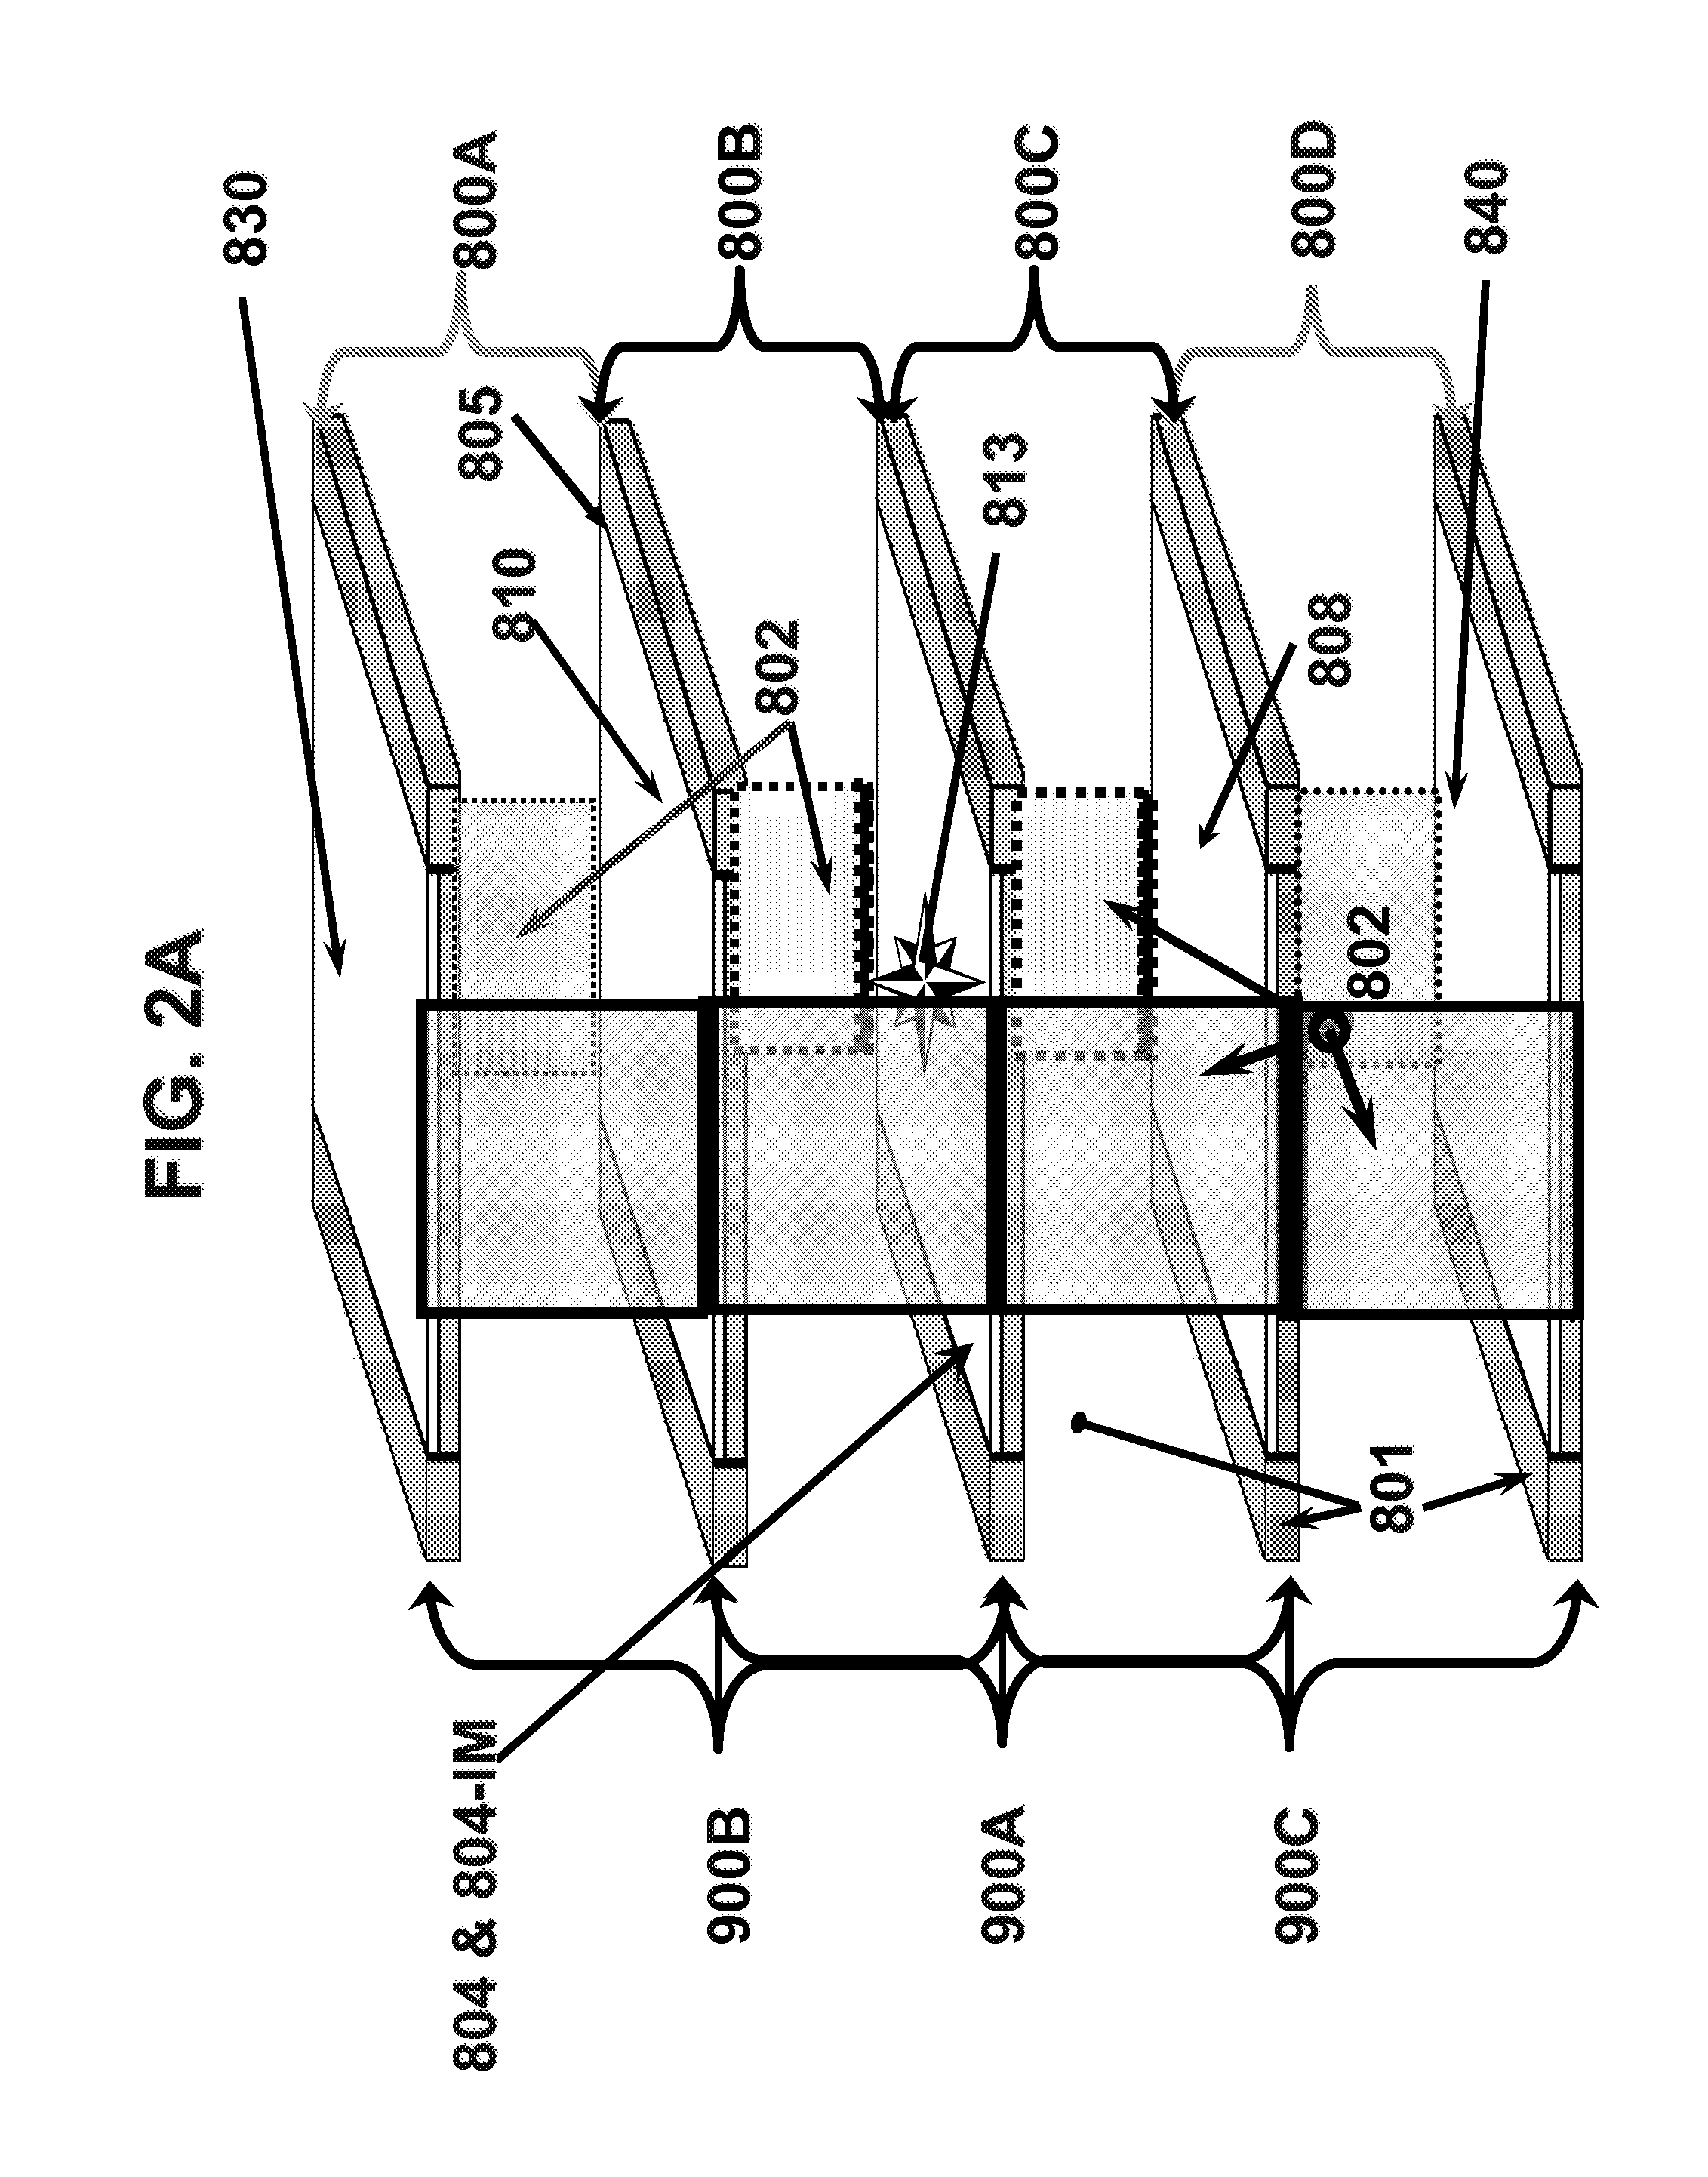 Energy Conditioning Circuit Arrangement for Integrated Circuit